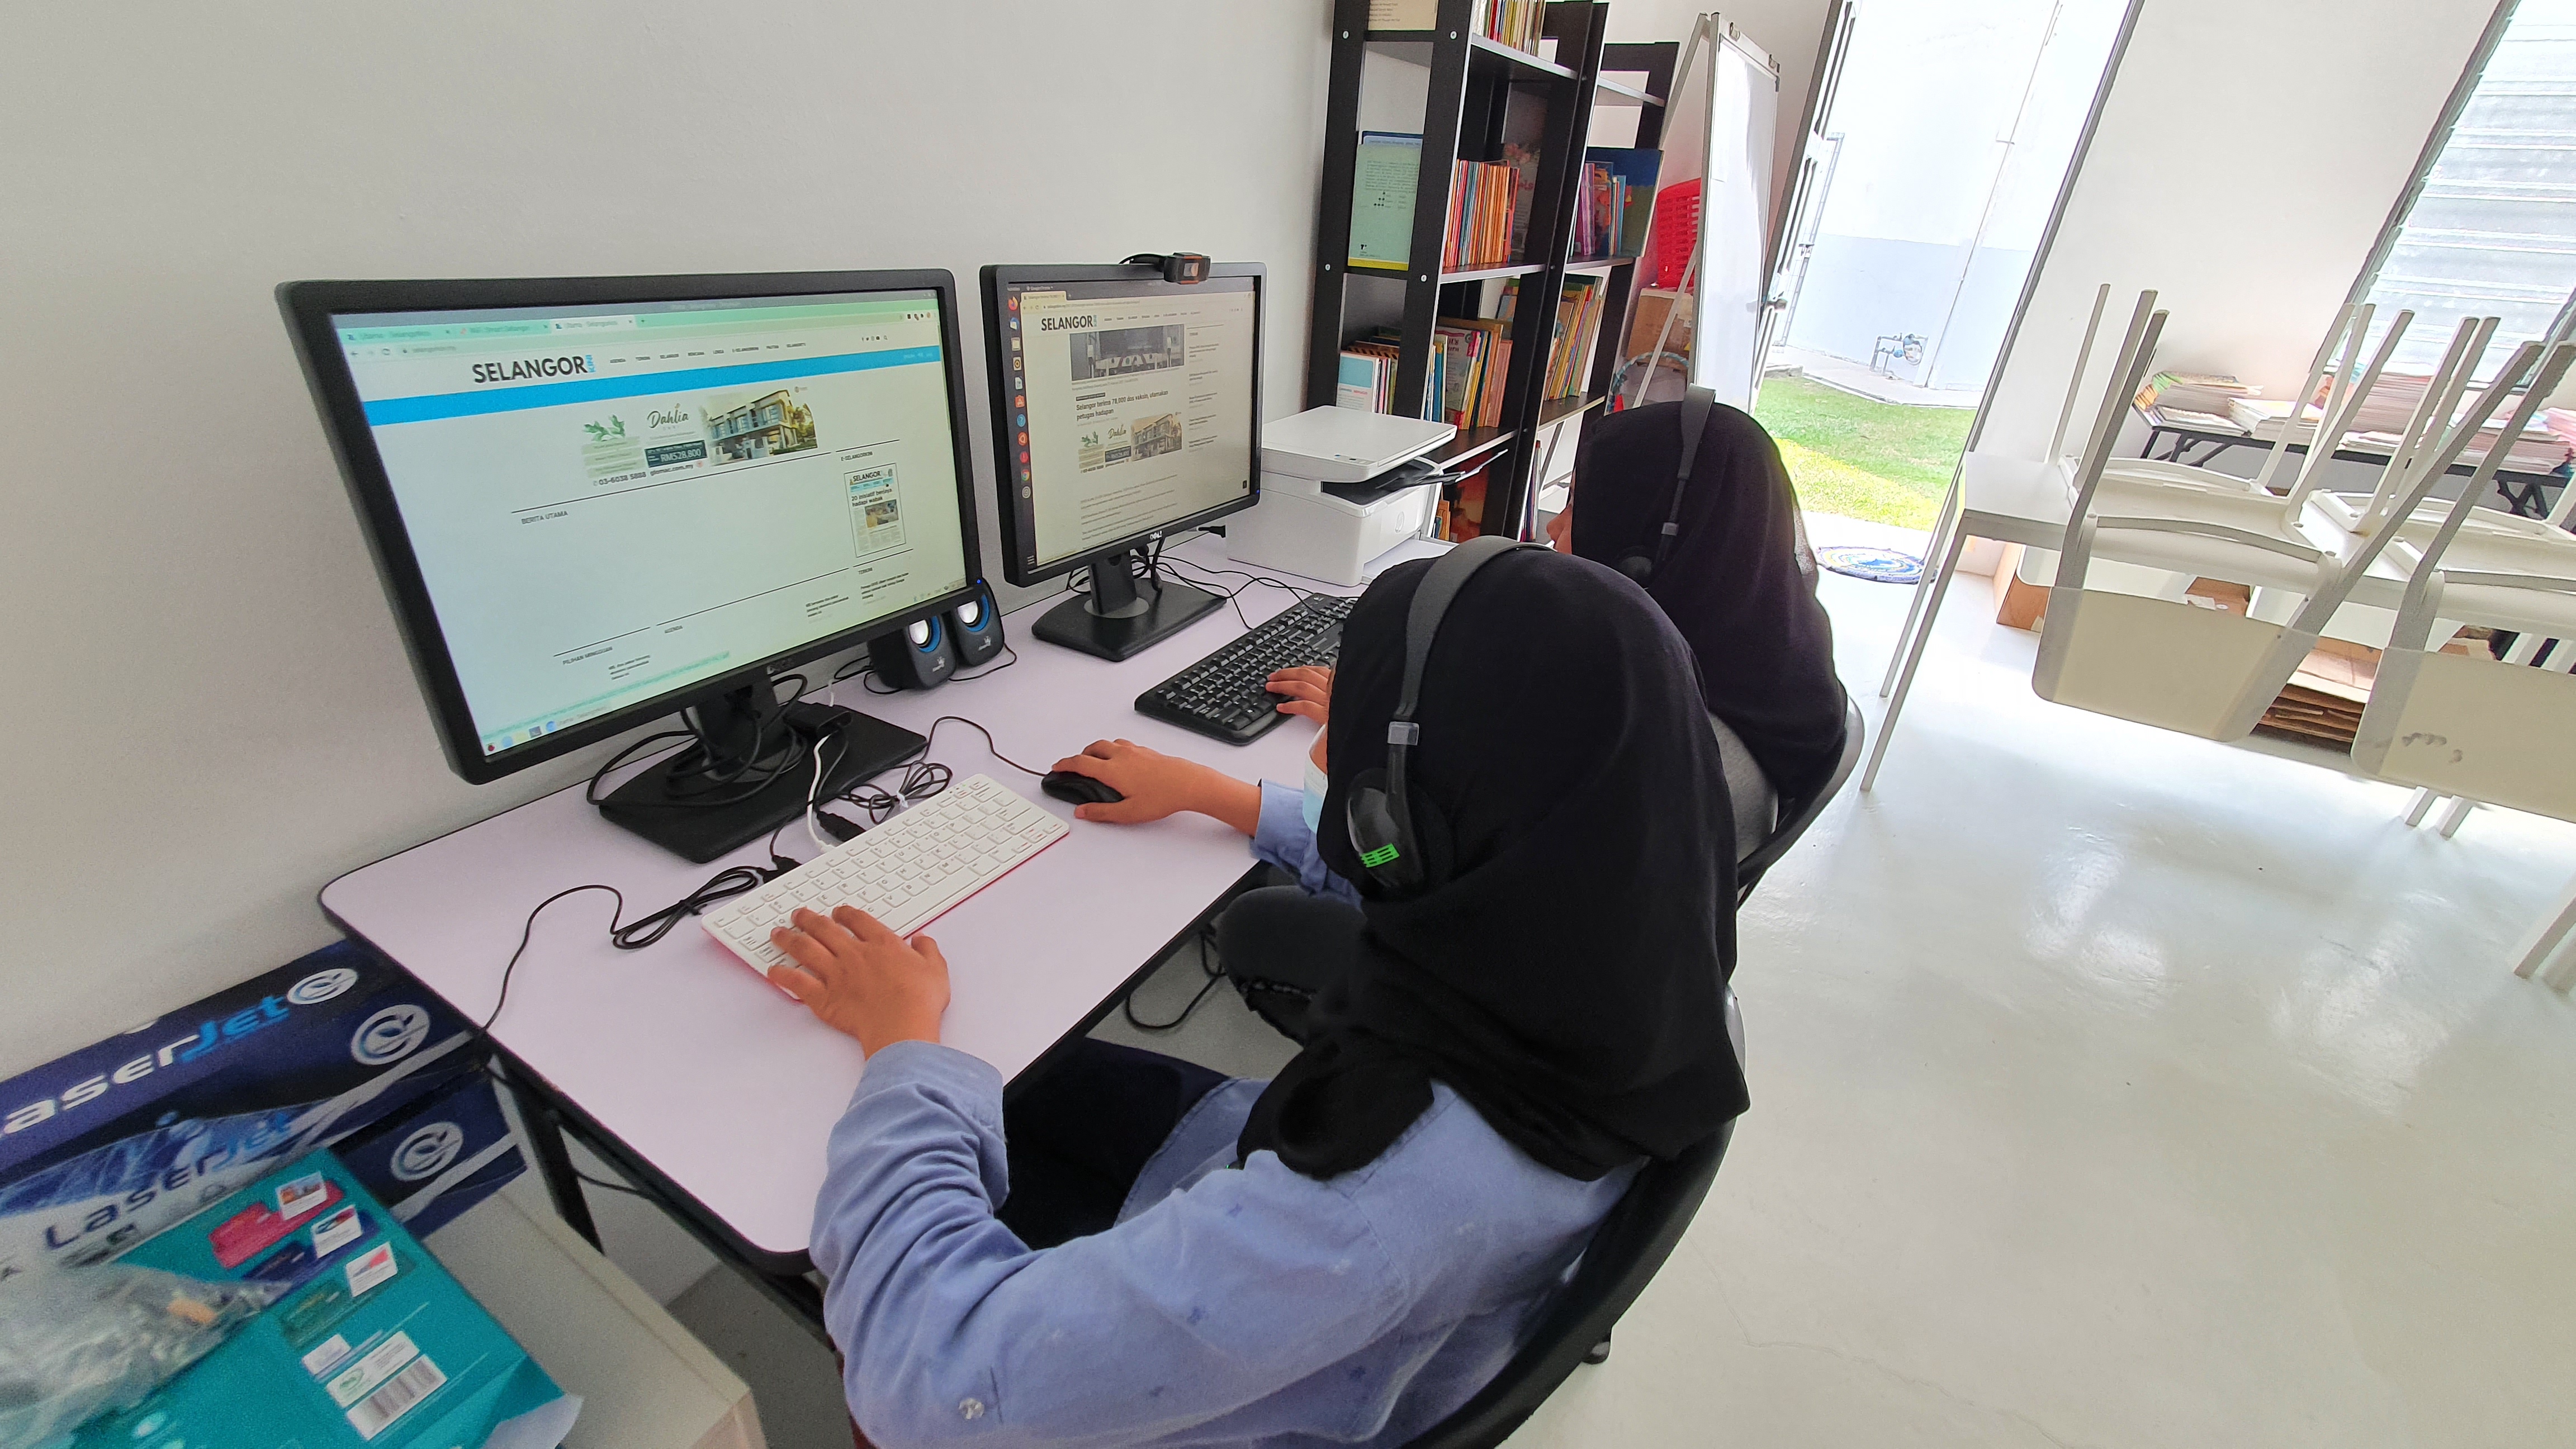 Two students using community library facilities to access Internet